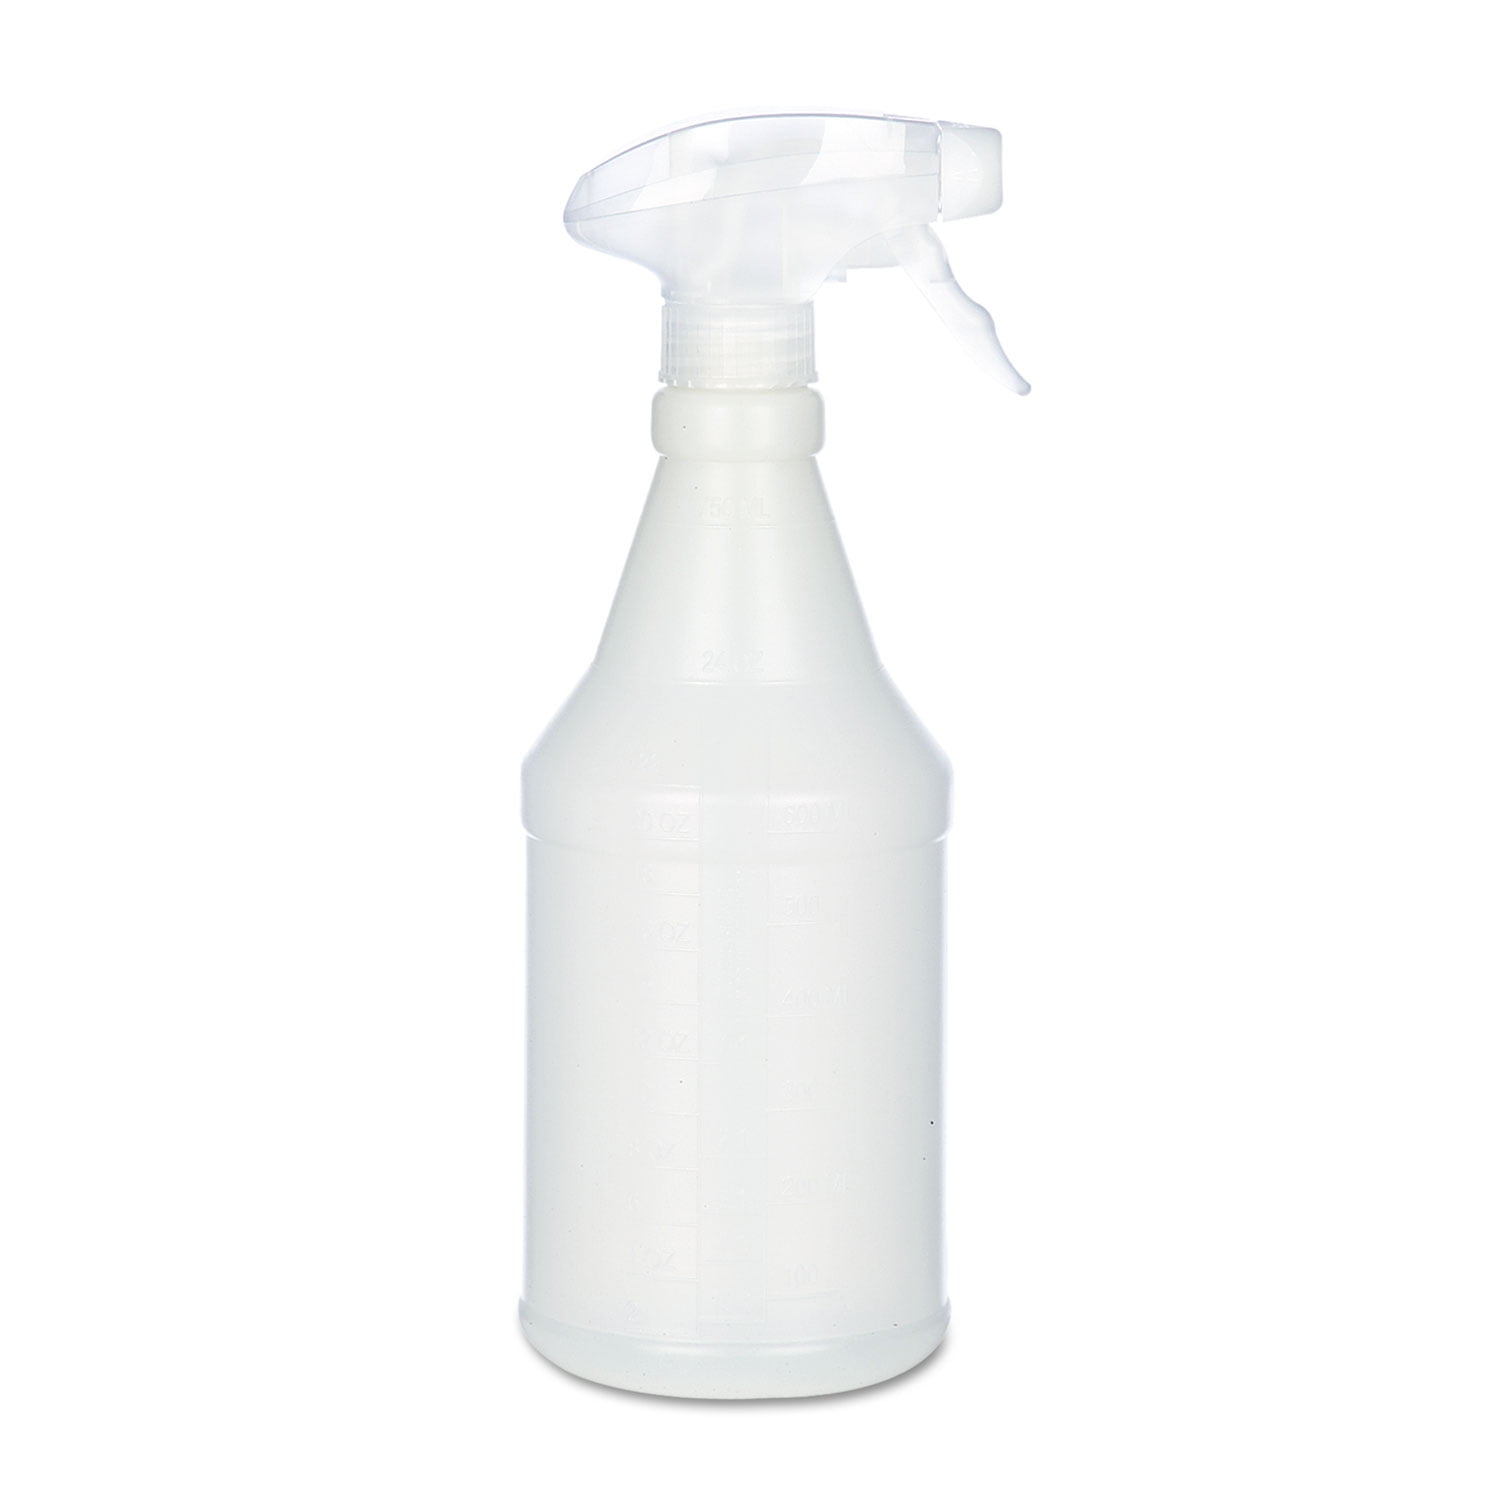 Gold Standard 32 oz Spray Bottle Trigger Replacement -- Commercial Spray Nozzles